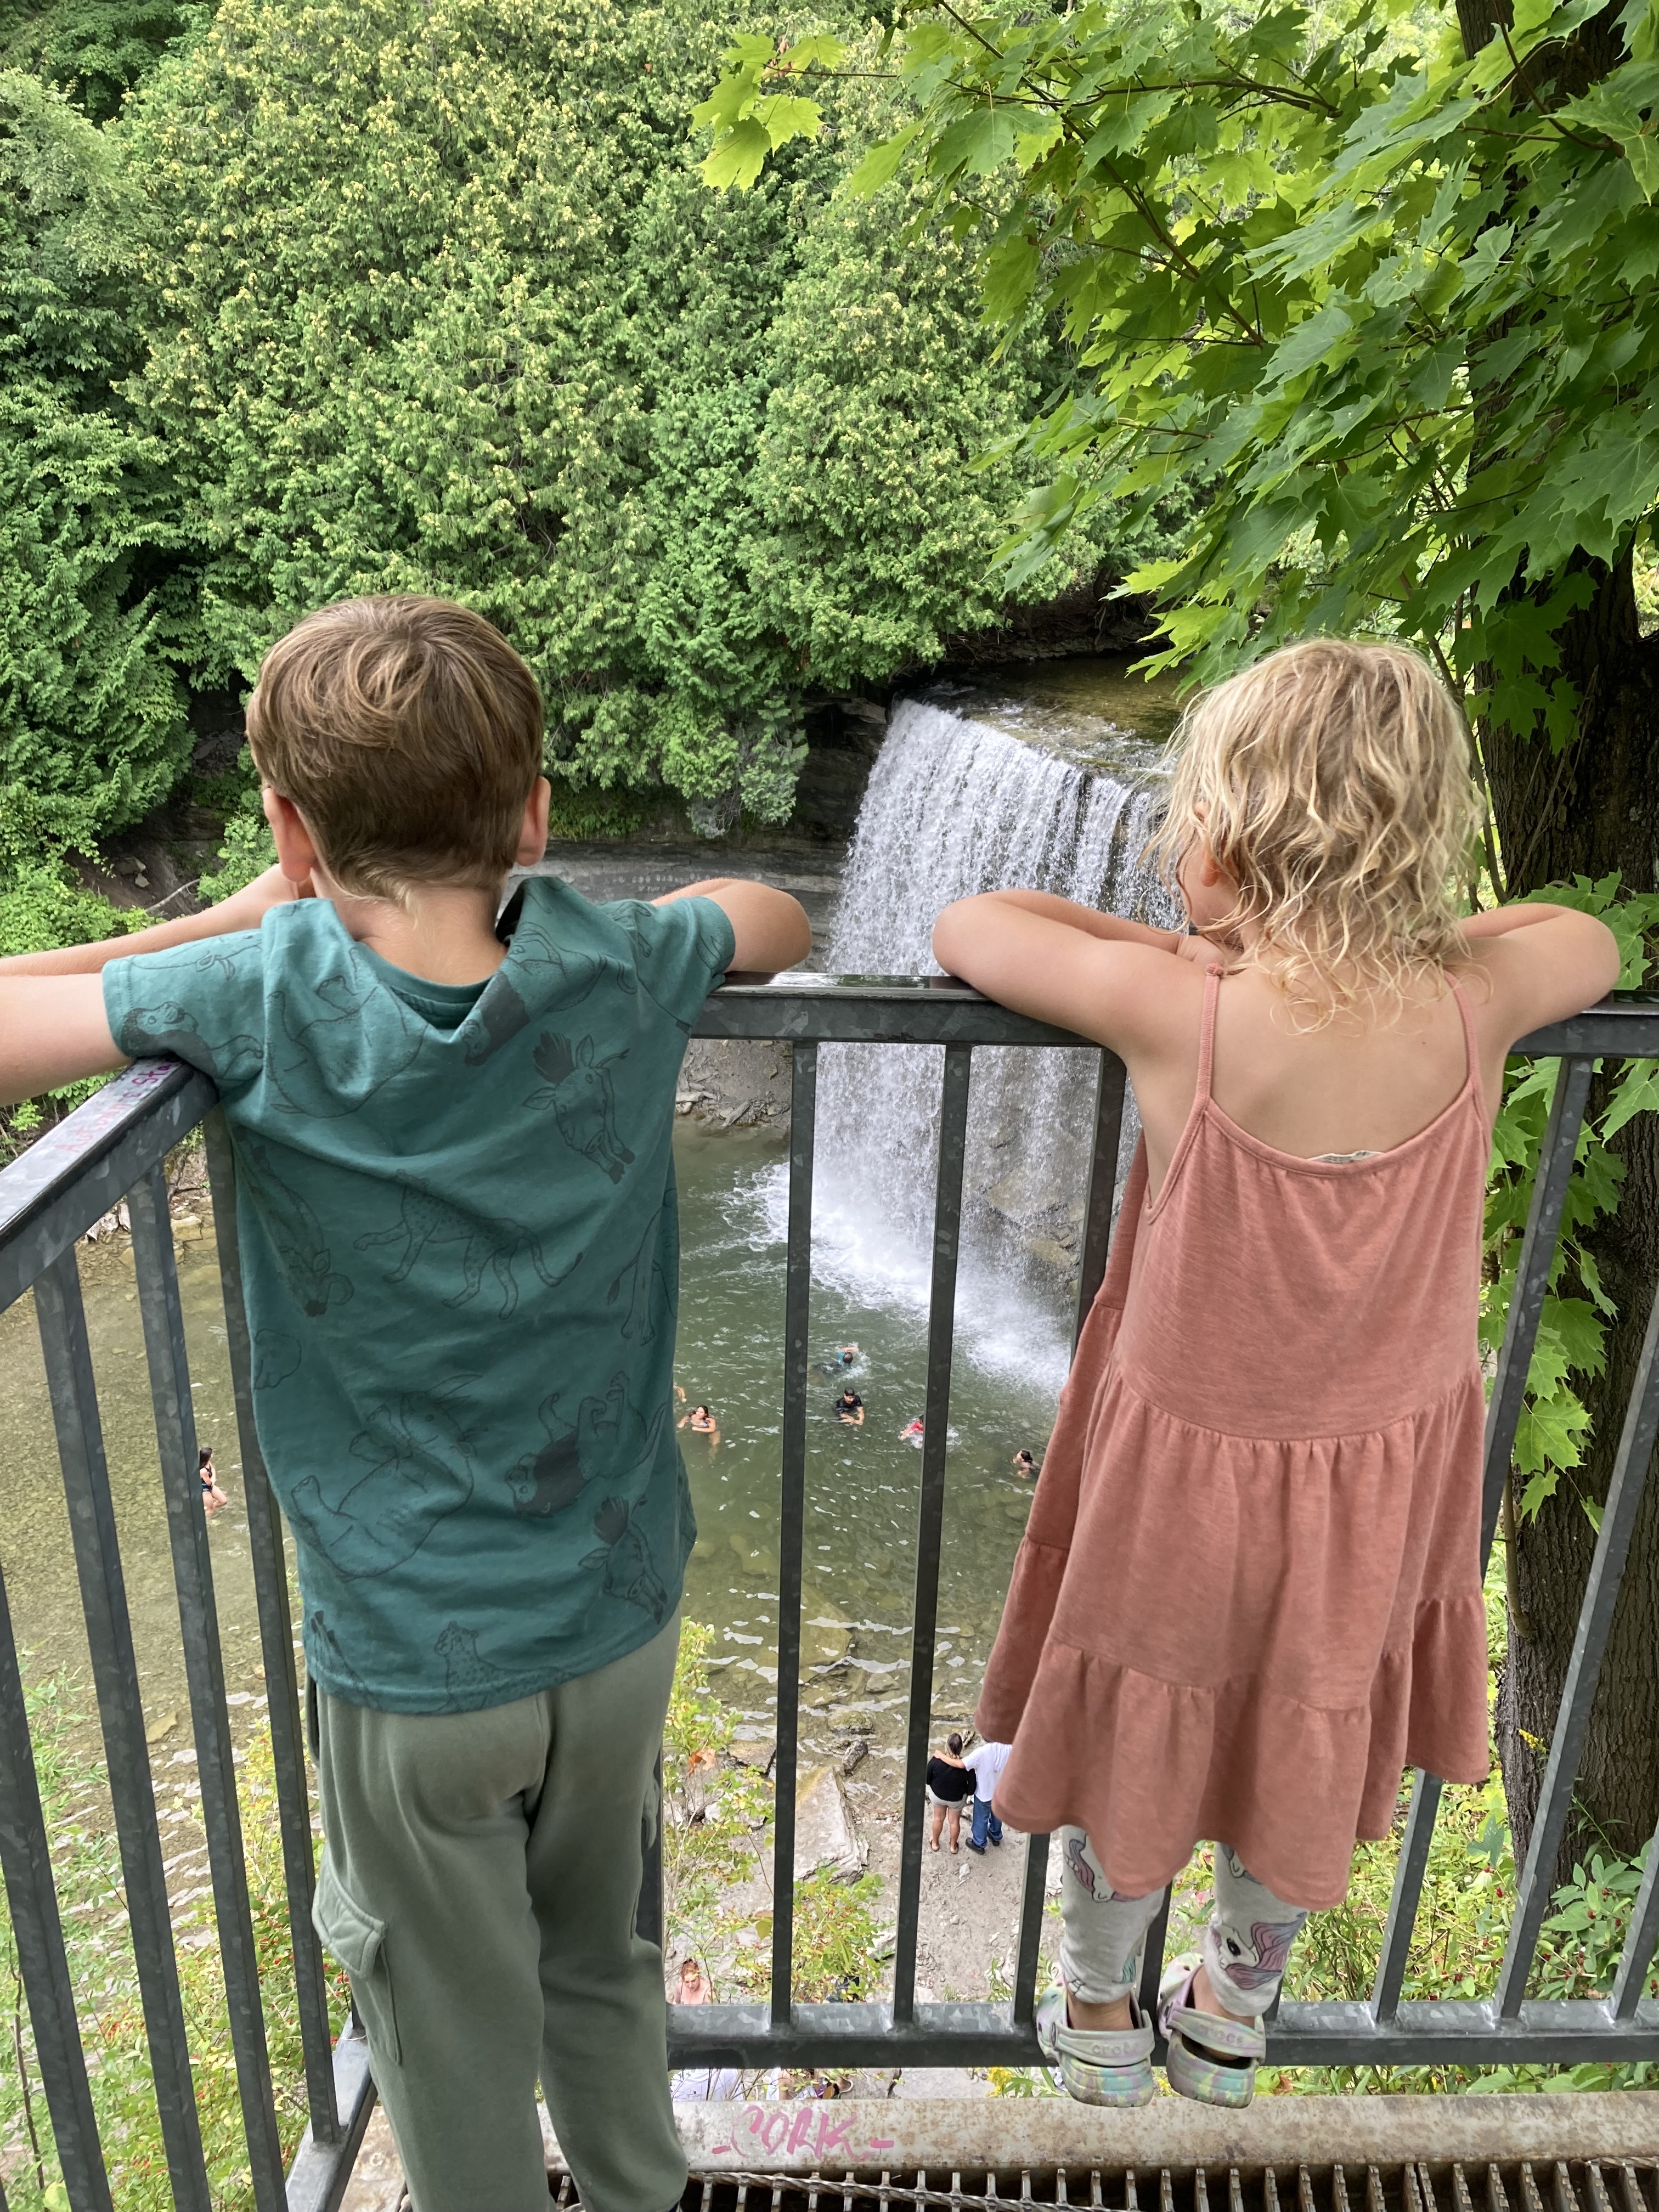 Kids wowing over Bridal Veil Falls